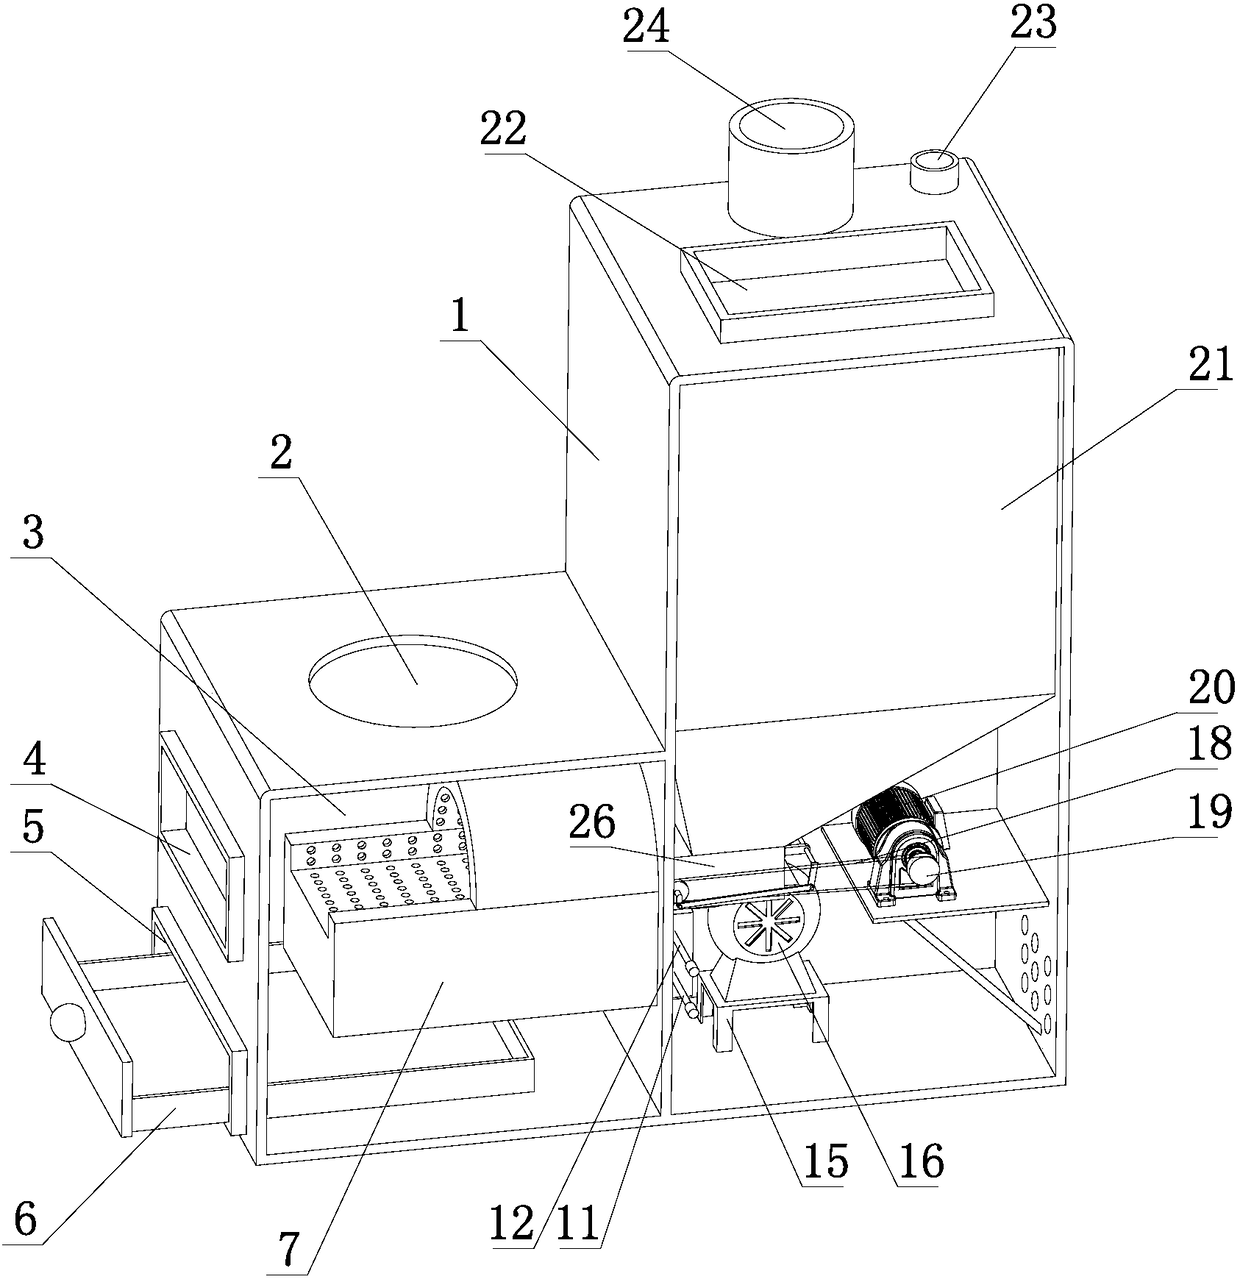 Automatic feeding heating stove capable of combusting multiple kinds of fuel